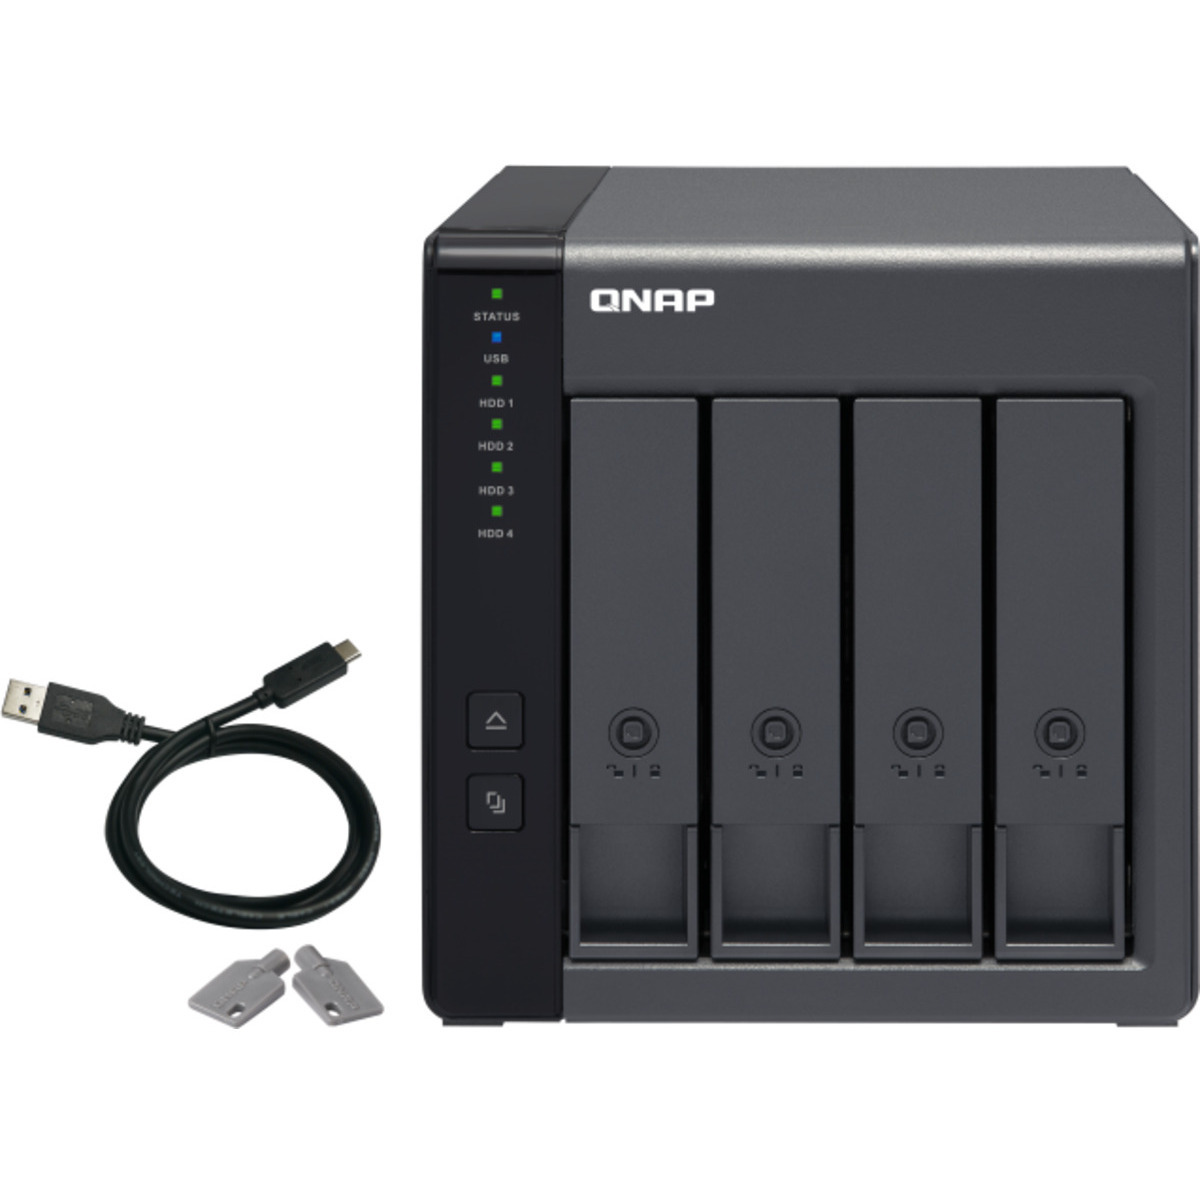 buy QNAP TR-004 External Expansion Drive 16tb Desktop Expansion Enclosure 4x4000gb Toshiba MN Series MN08ADA400E 3.5 7200rpm SATA 6Gb/s HDD NAS Class Drives Installed - Burn-In Tested - ON SALE - nas headquarters buy network attached storage server device das new raid-5 free shipping simply usa TR-004 External Expansion Drive